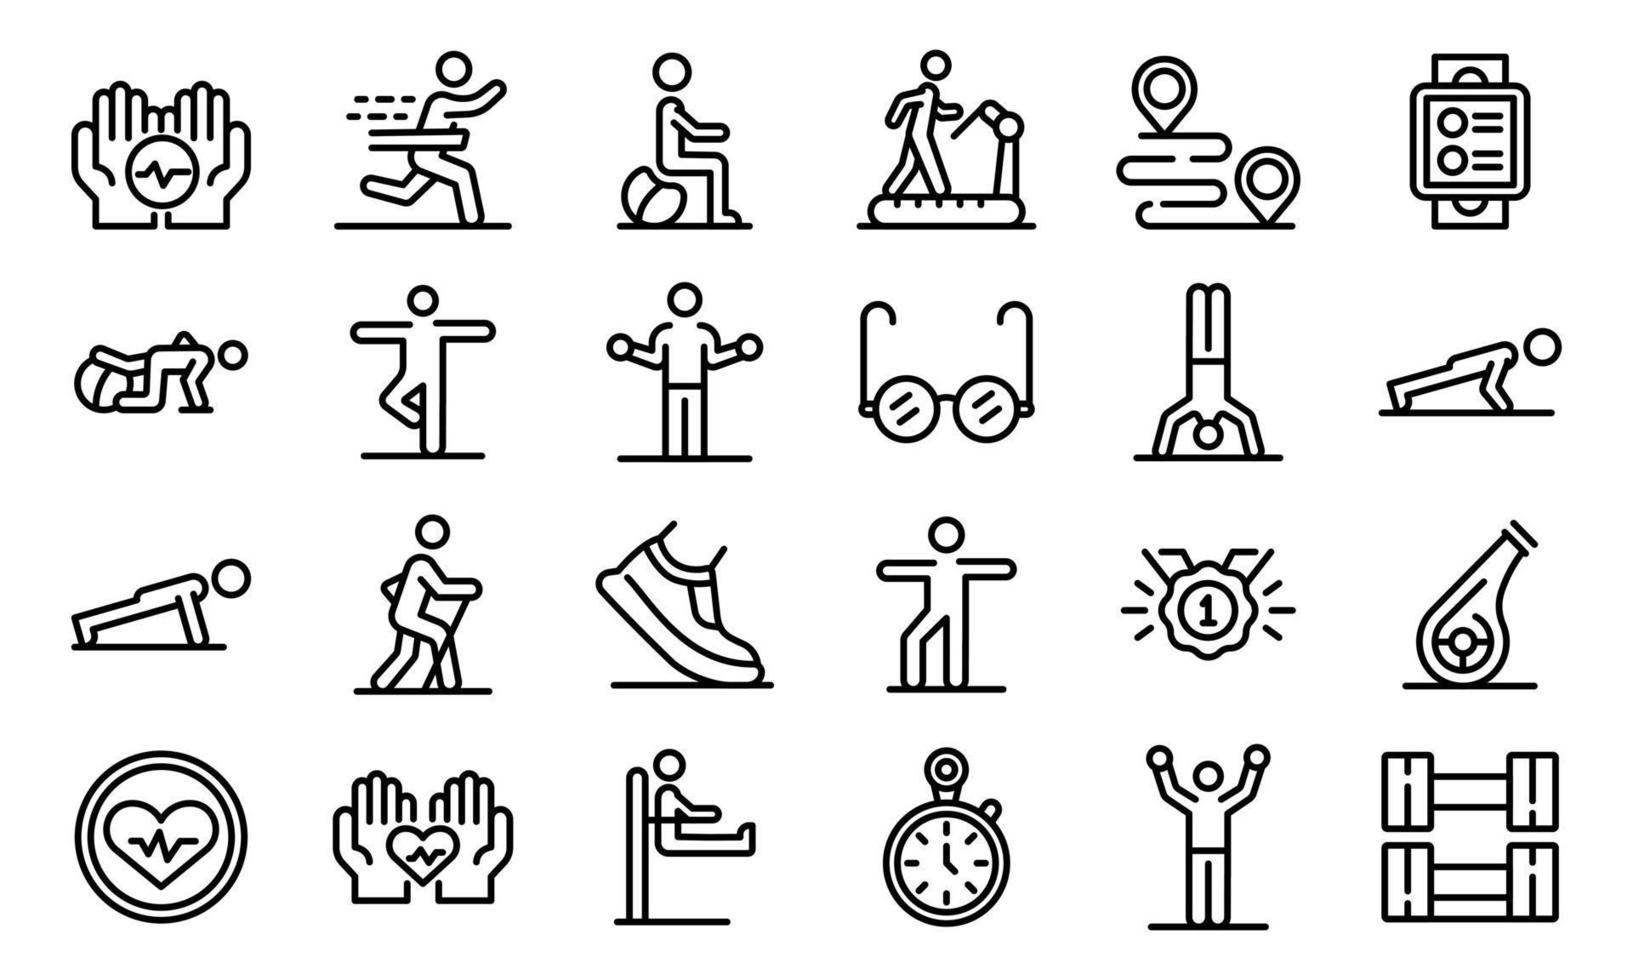 Workout seniors icons set, outline style vector